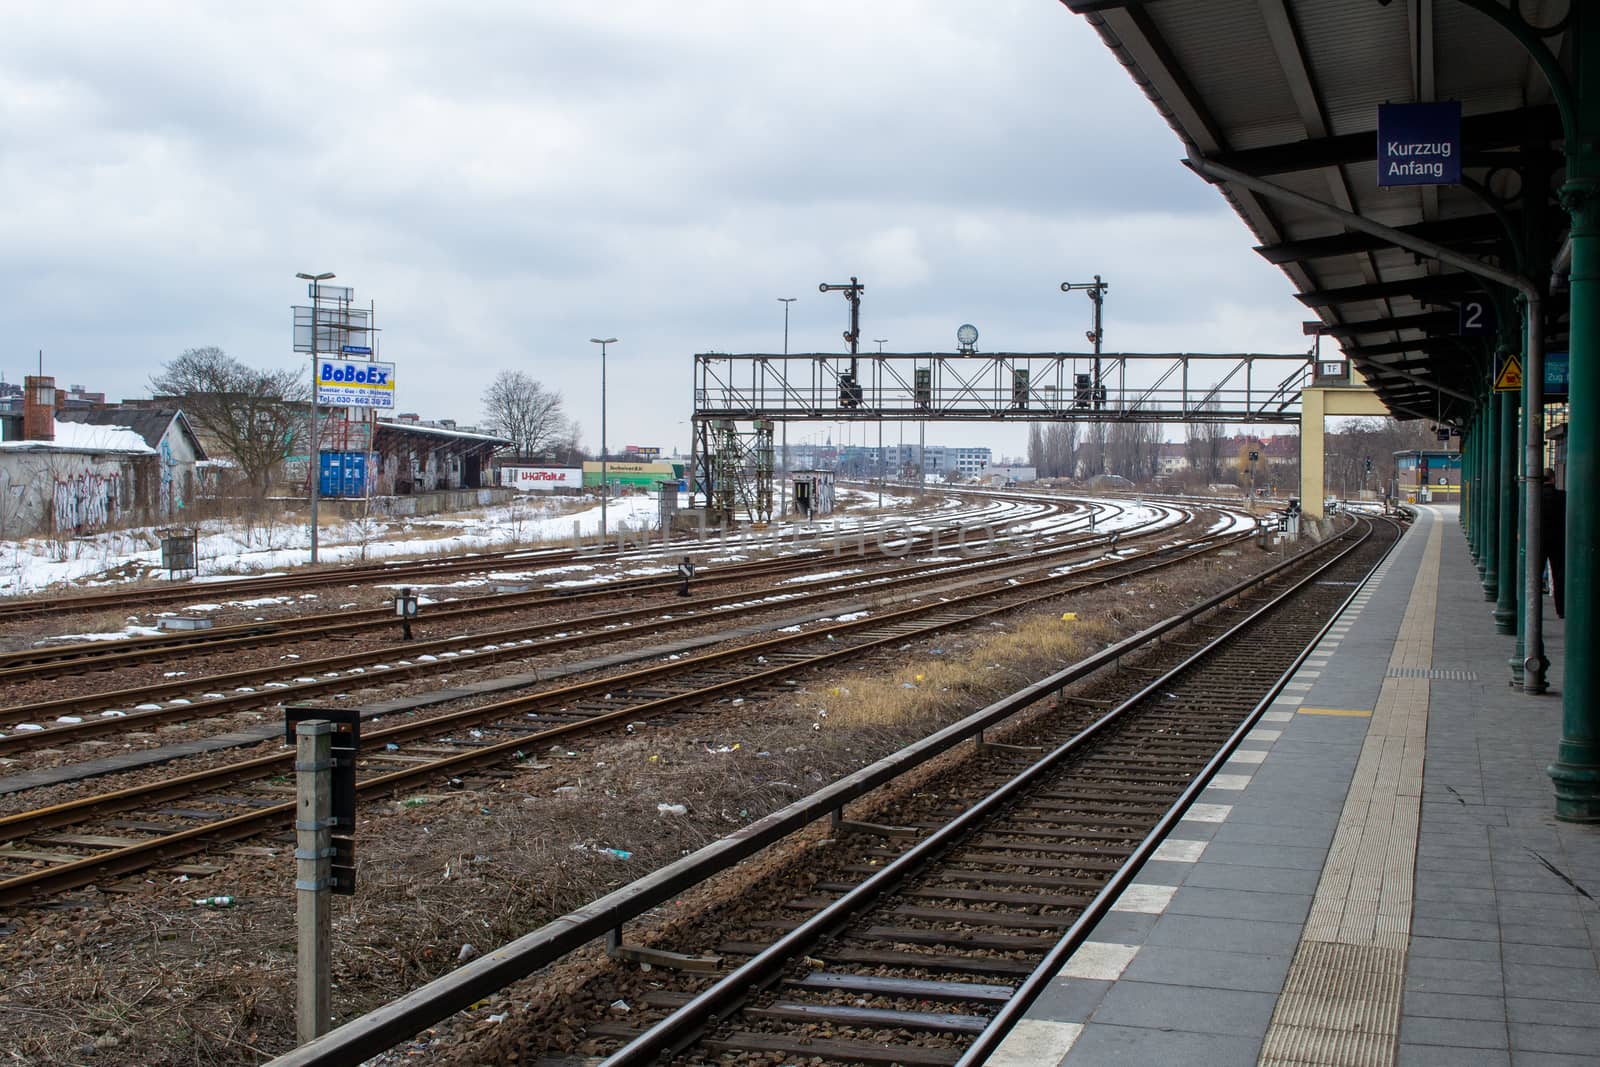 Railroad platform winter scene in Berlin, Germany, with empty tracks and platform by kb79